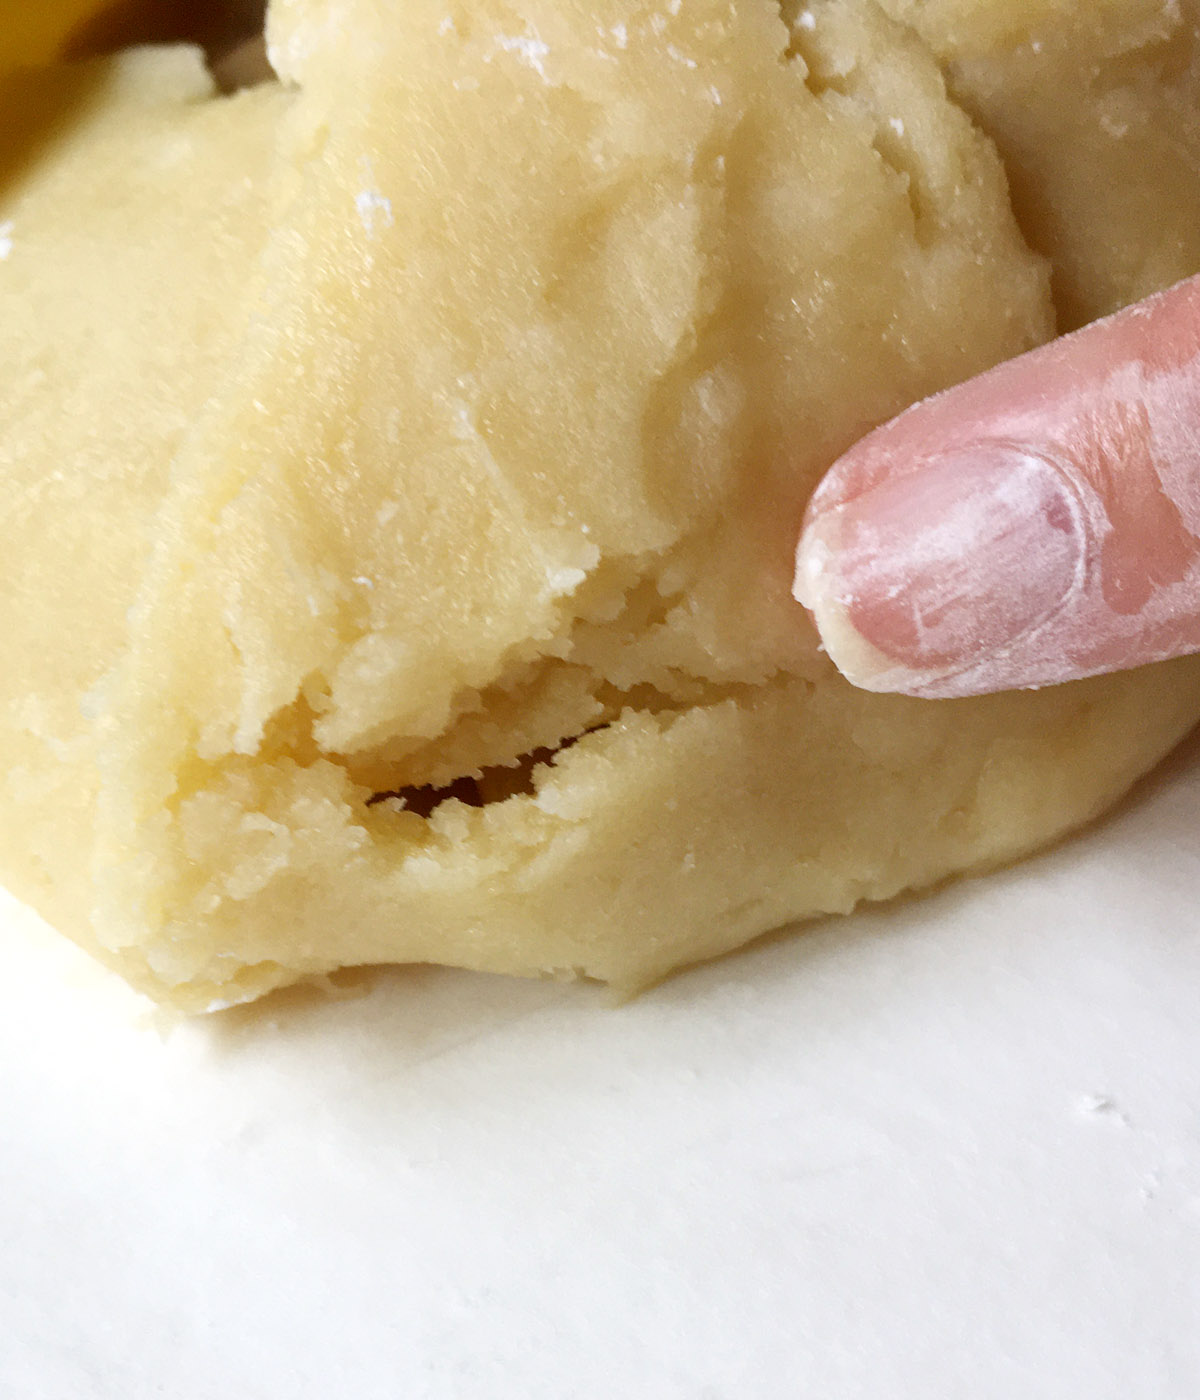 Close-up of a finger pointing to a crack in pie crust dough.